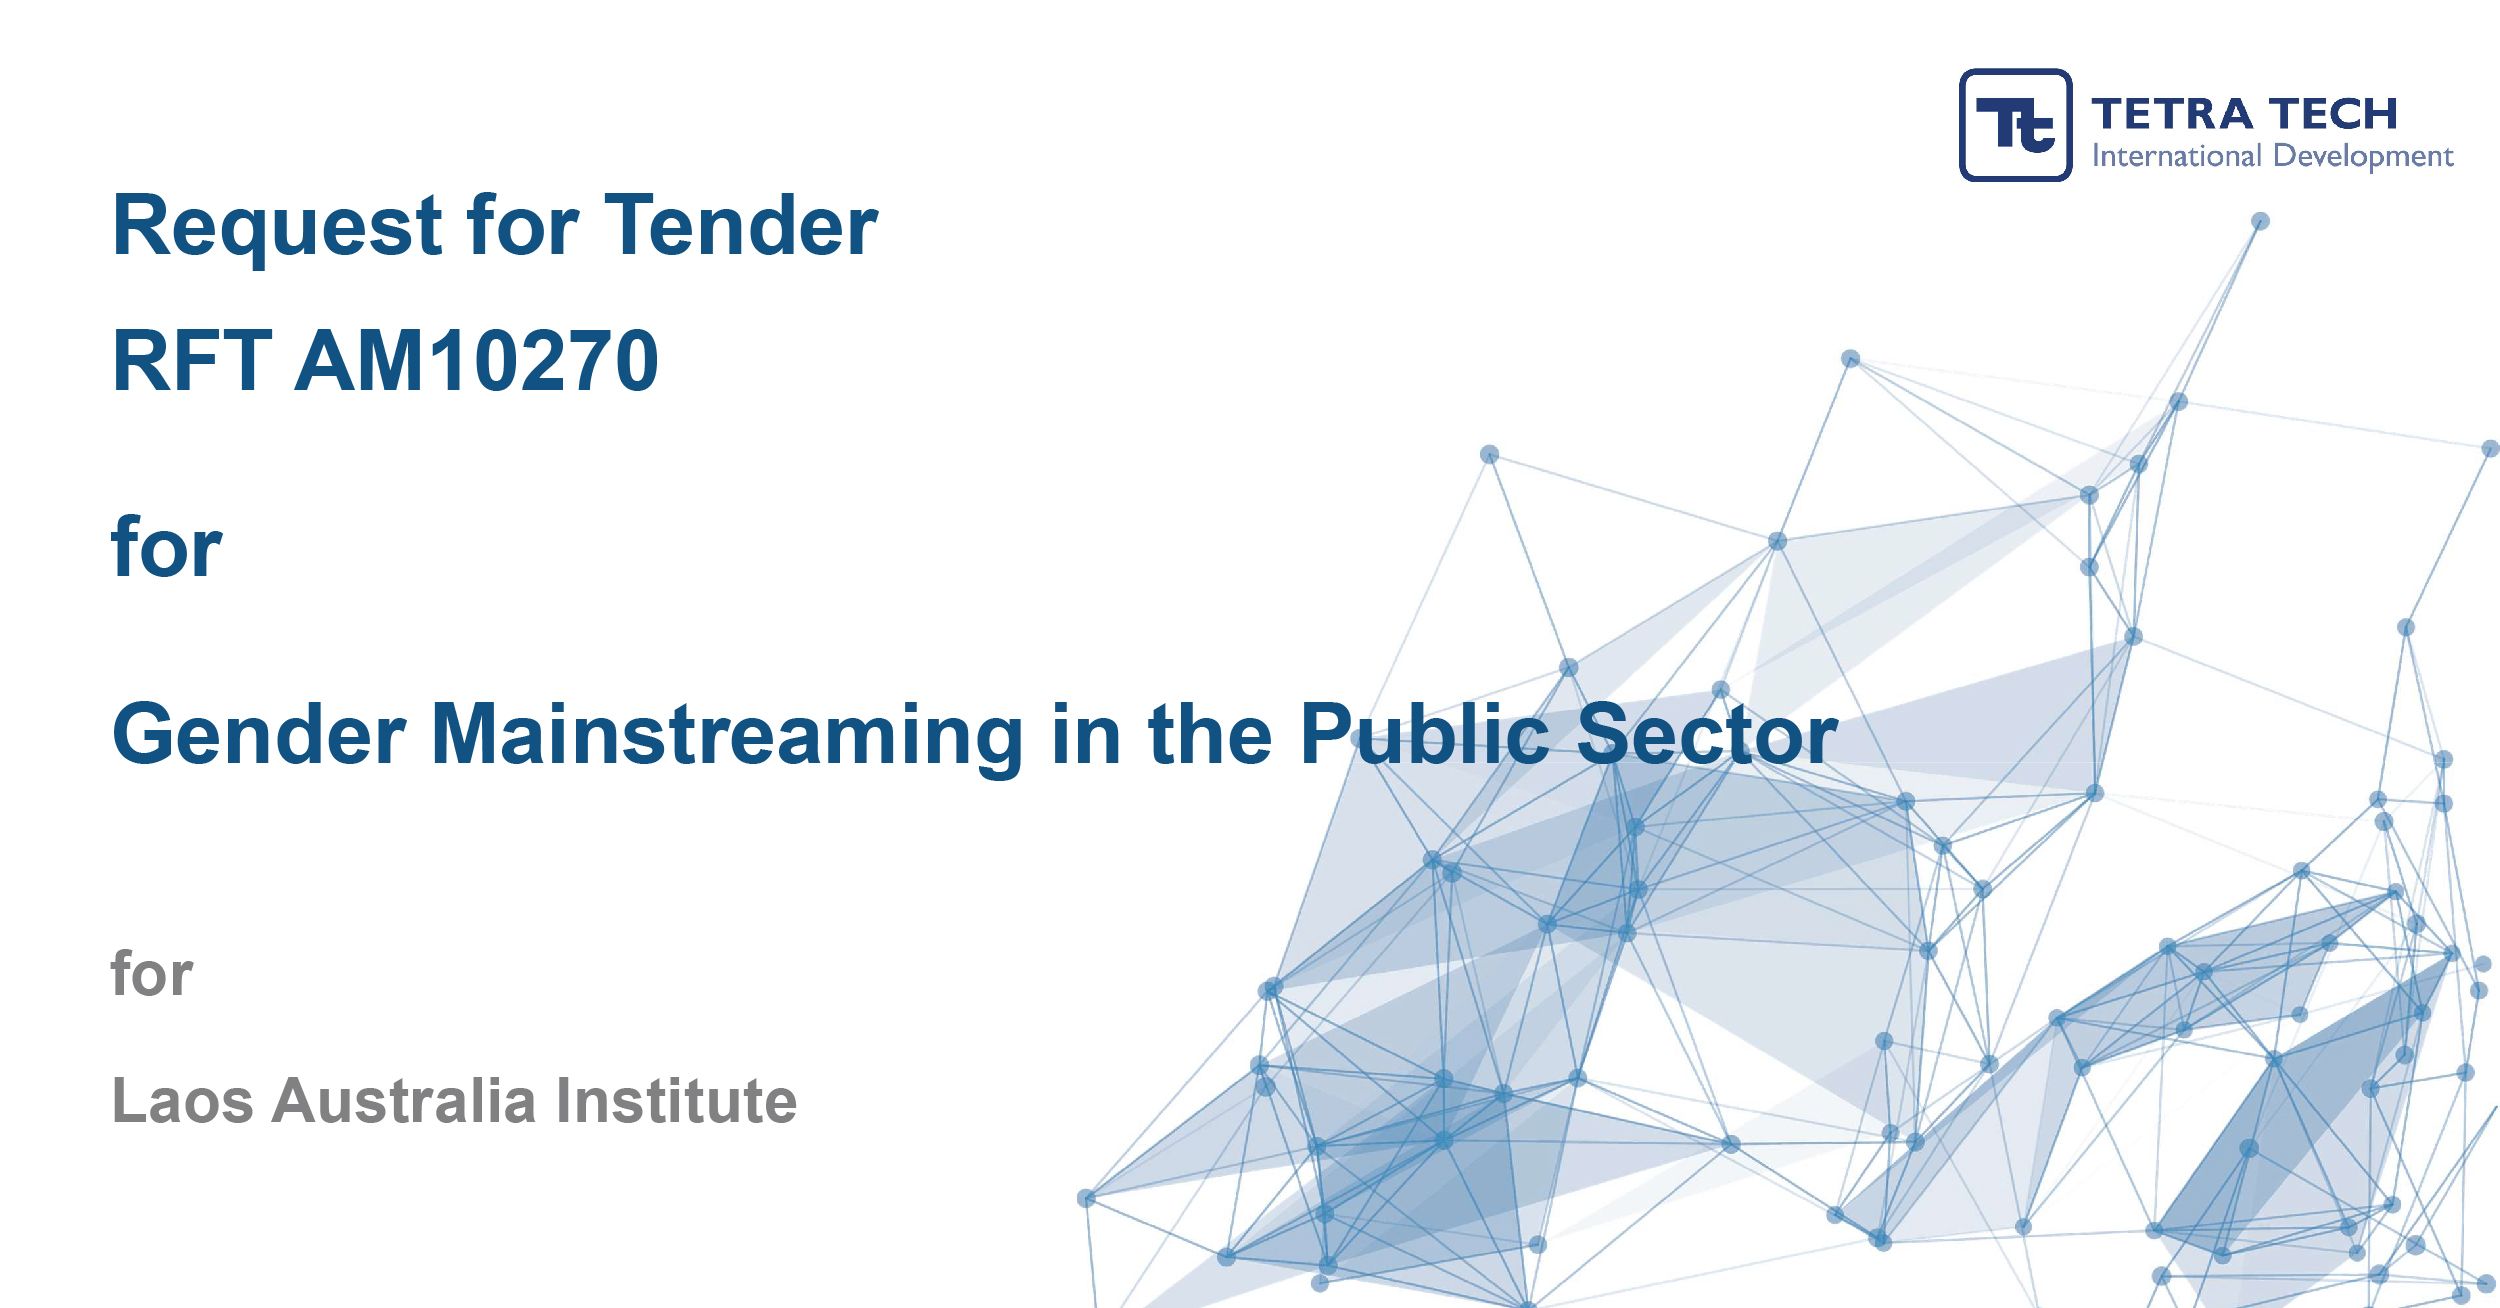 You are invited to submit a tender for the provision of: Laos Australia Institute Gender Mainstreaming in the Public Sector AM10270